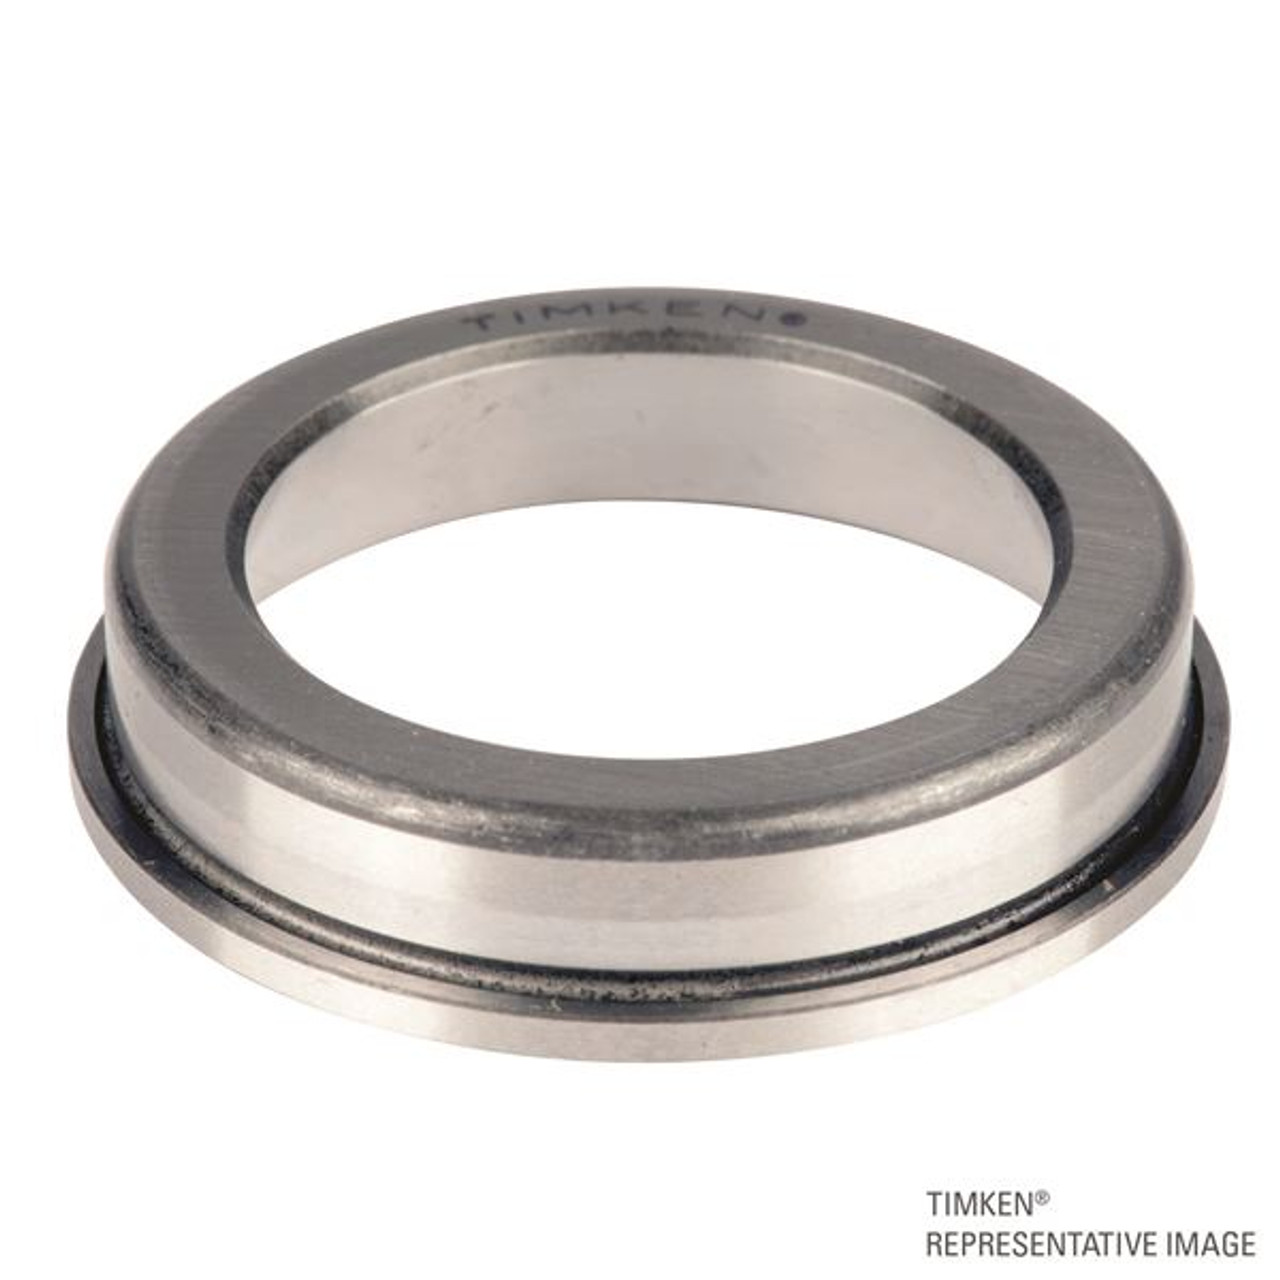 Timken® Single Row Flanged Cup  LM757010B-2